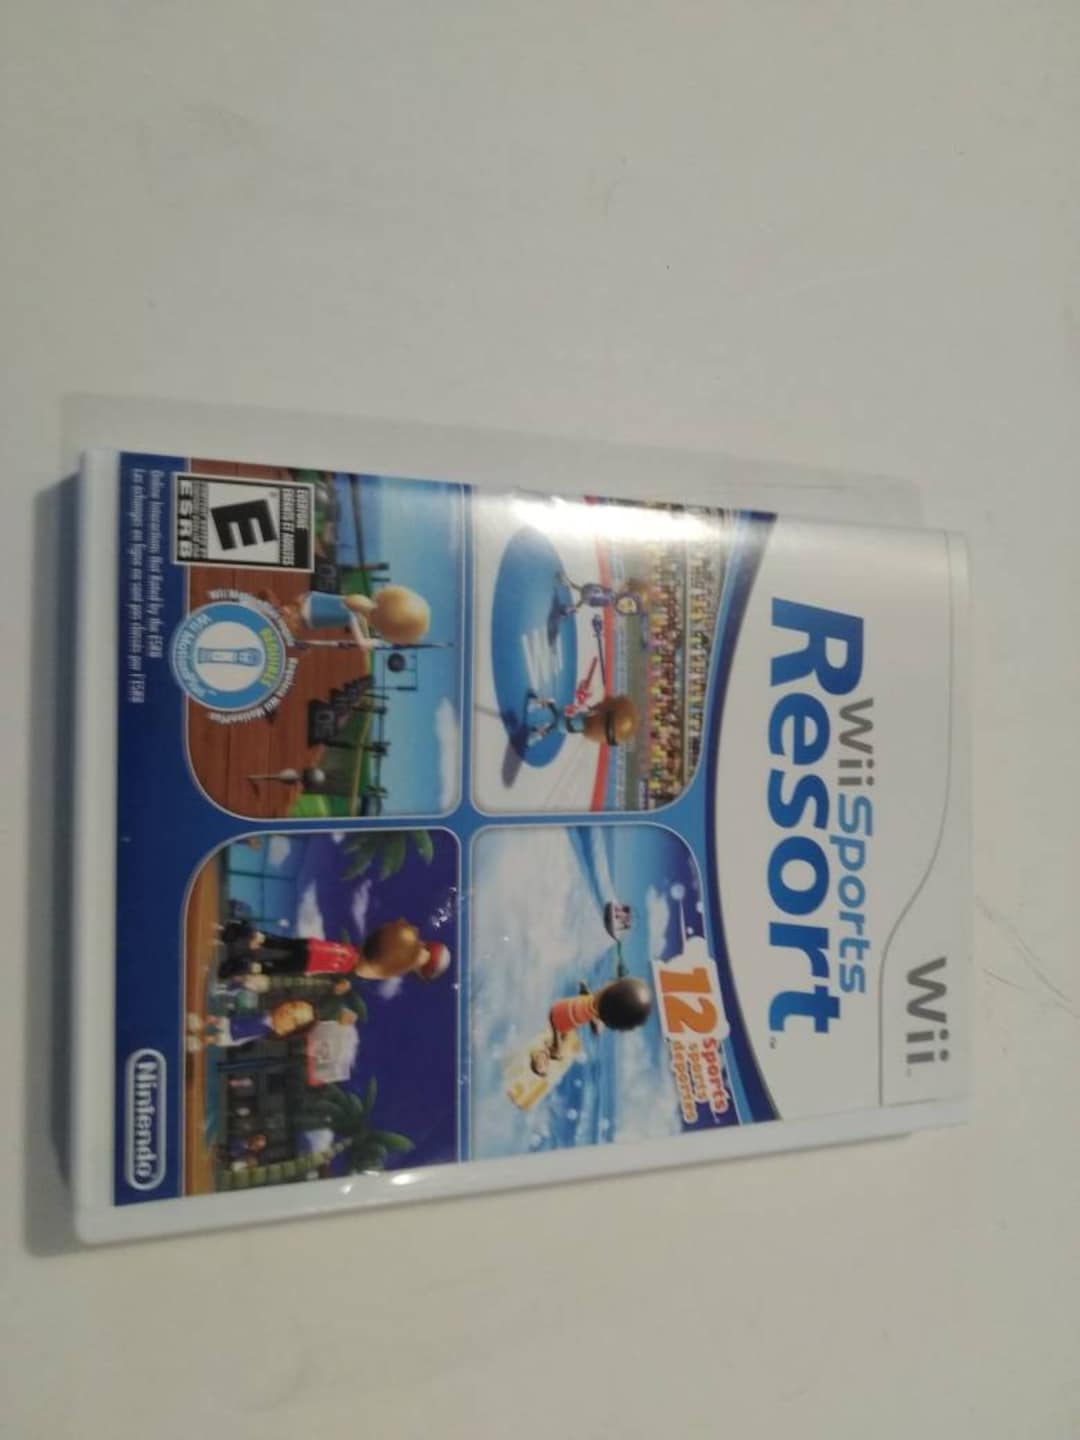 Wii Sports Resort - Plugged In